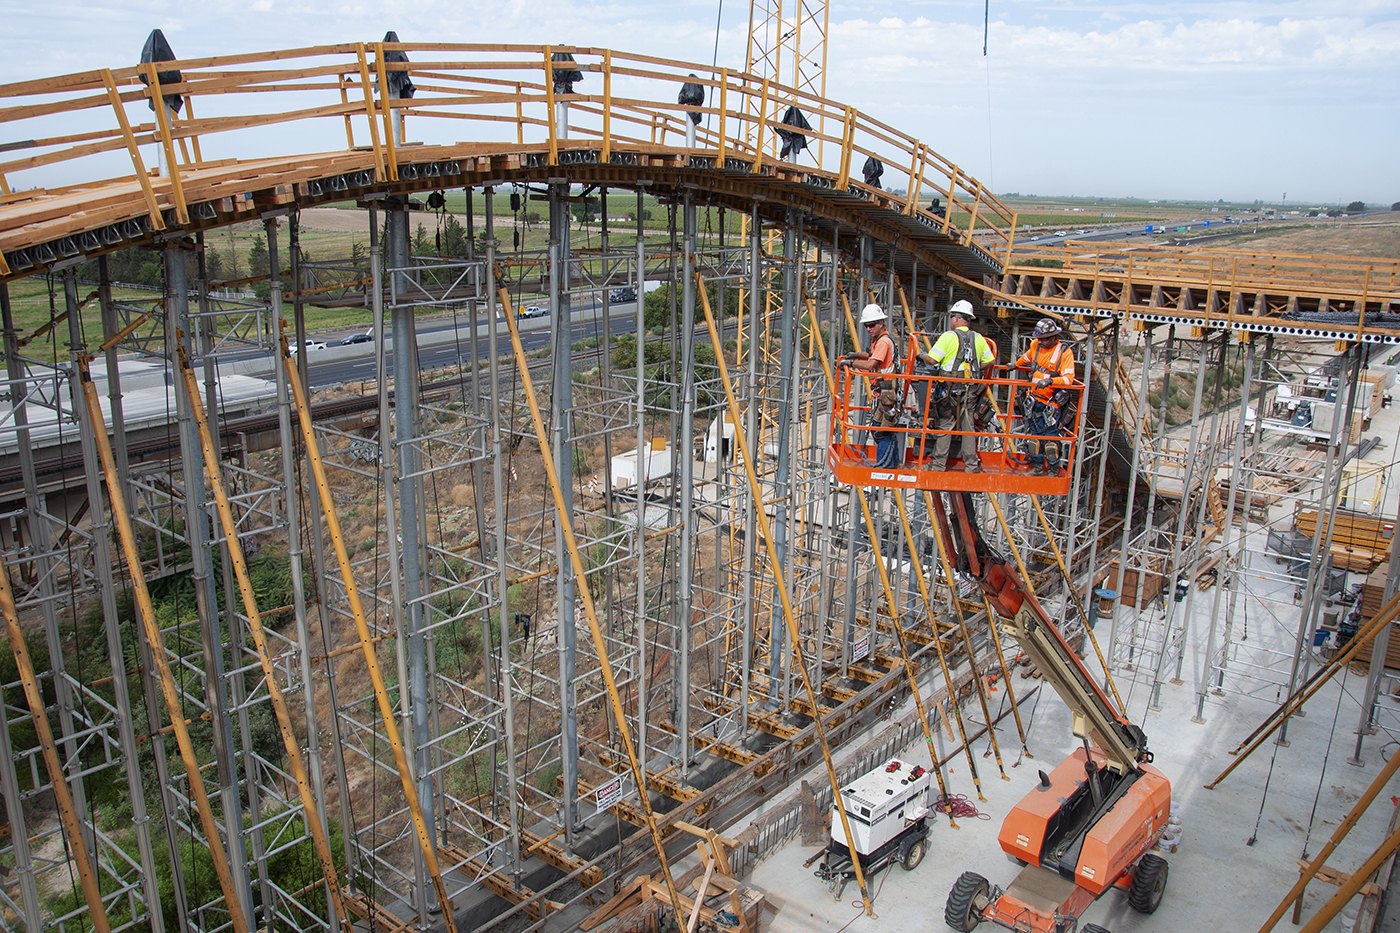 Workers constructing the arches at the San Joaquin River Viaduct